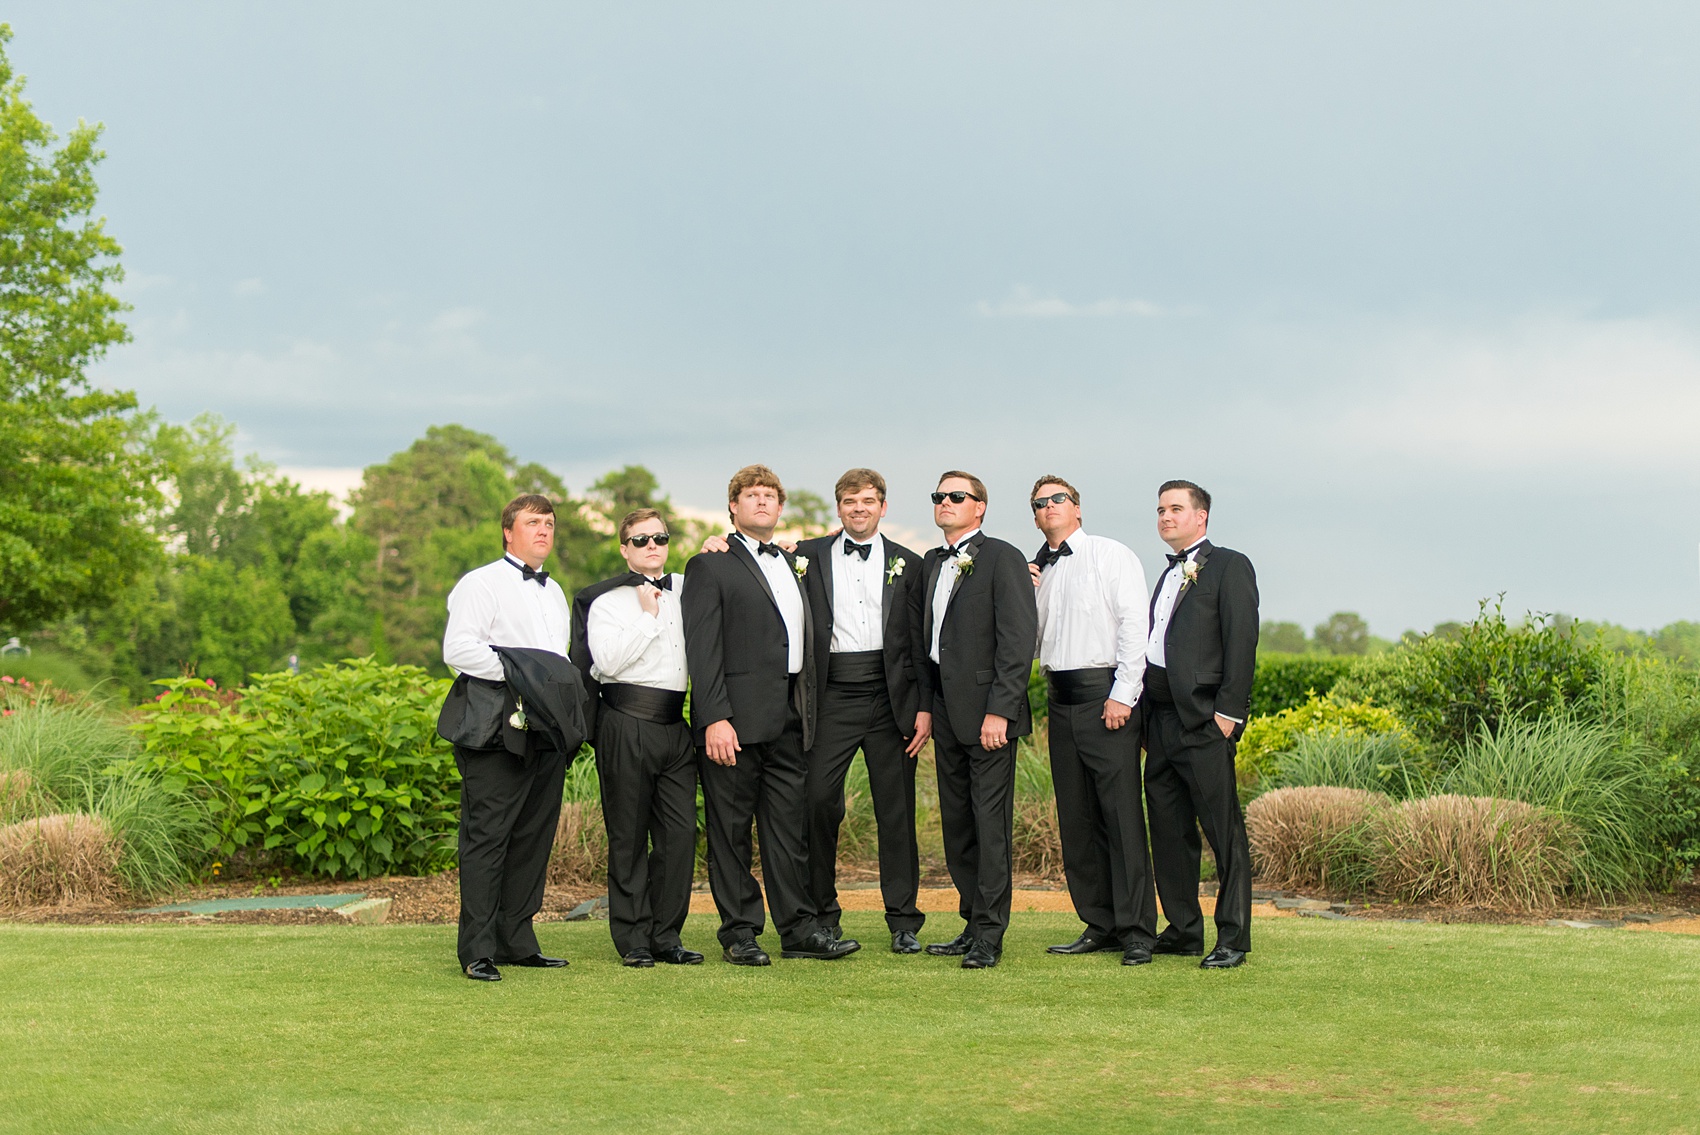 Mikkel Paige Photography pictures of a venue in Durham, North Carolina. The Washington Duke Inn is perfect for a summer wedding! Planning for this beautiful event was by McLean Events. The groom and groomsmen had their pictures taken on the picturesque golf course. They wore classic black tuxedos and bow ties. Click through for more details about this June wedding! #MikkelPaige #DurhamWeddings #WashingtonDukeInn #DukeWedding #Duke #McLeanEvents #blueandwhitewedding #golfcoursewedding #golfcoursephotos #groomsmen #weddingparty #blacktuxedos